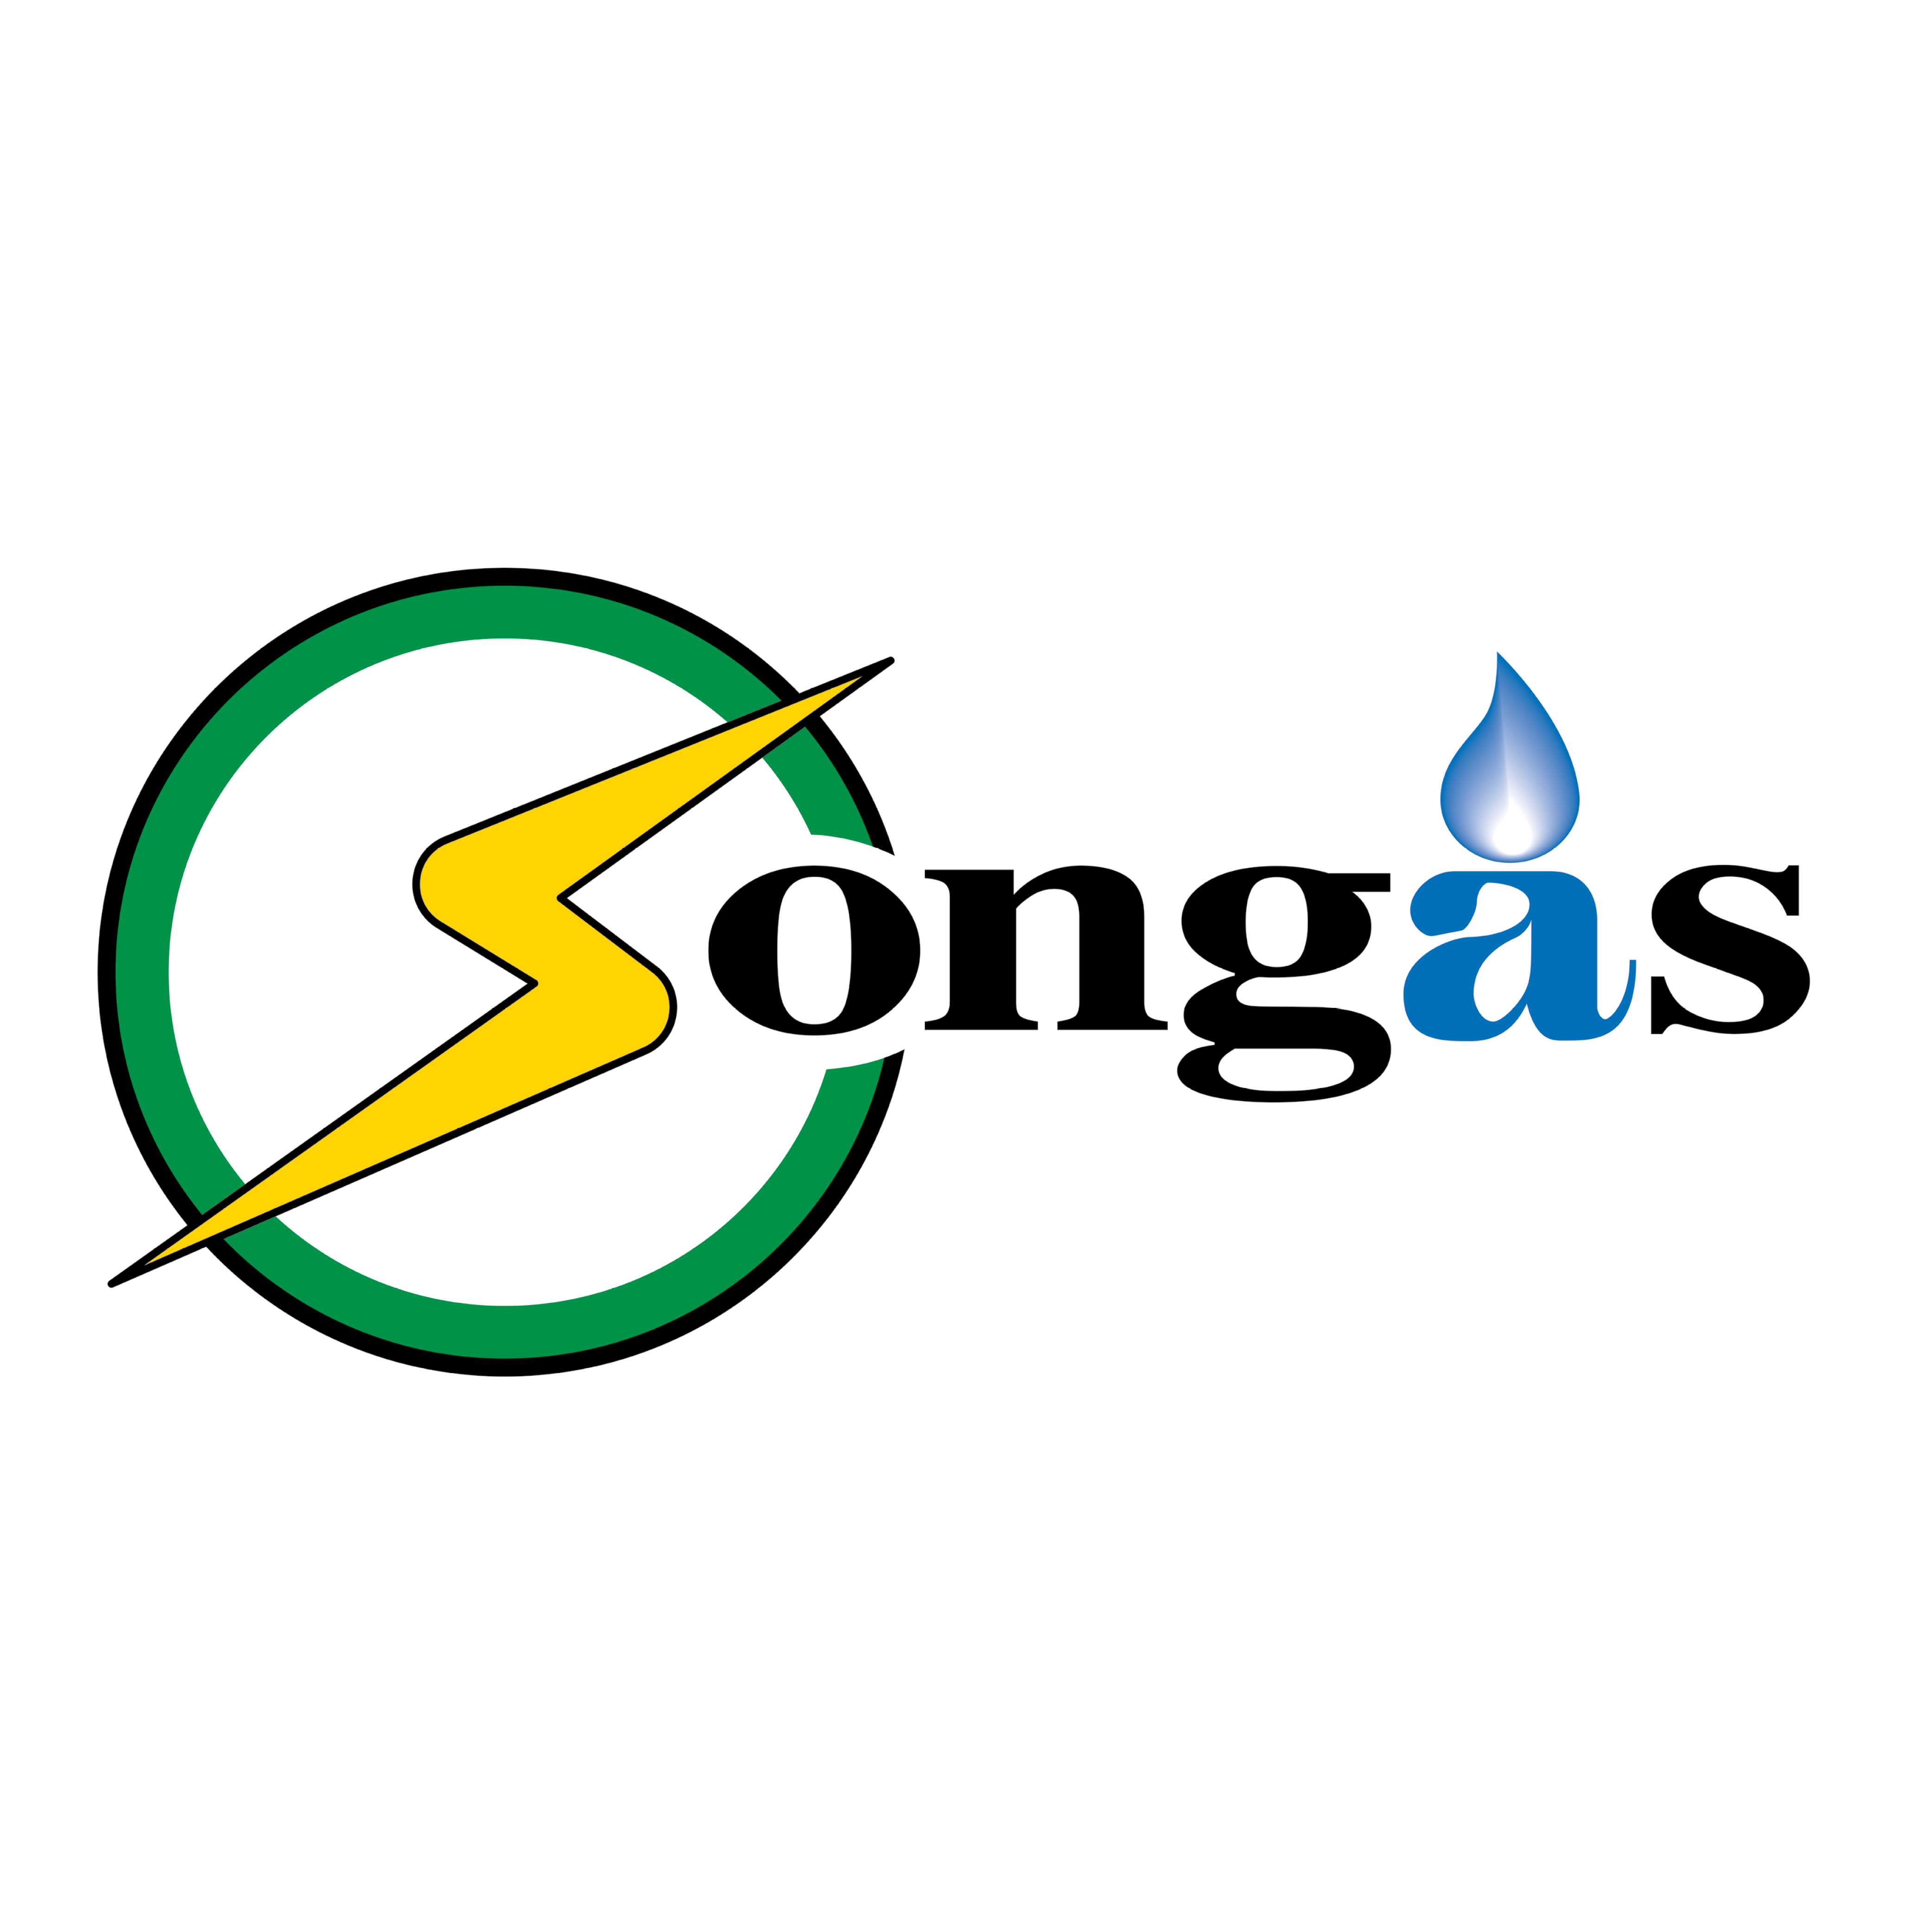 SONGAS